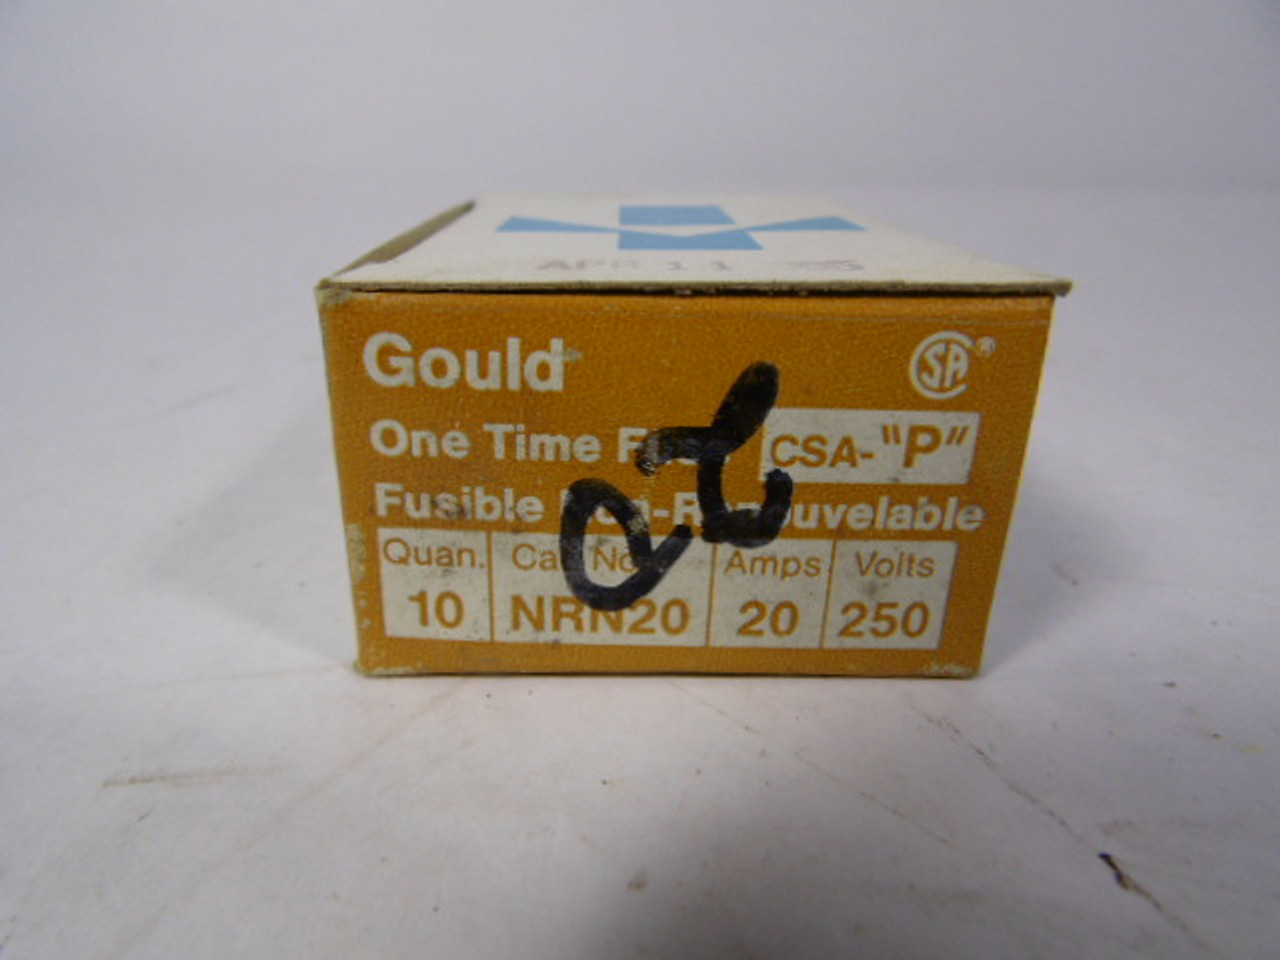 Gould NRN20 One Time Fuse 20A 250V 10-Pack ! NEW !